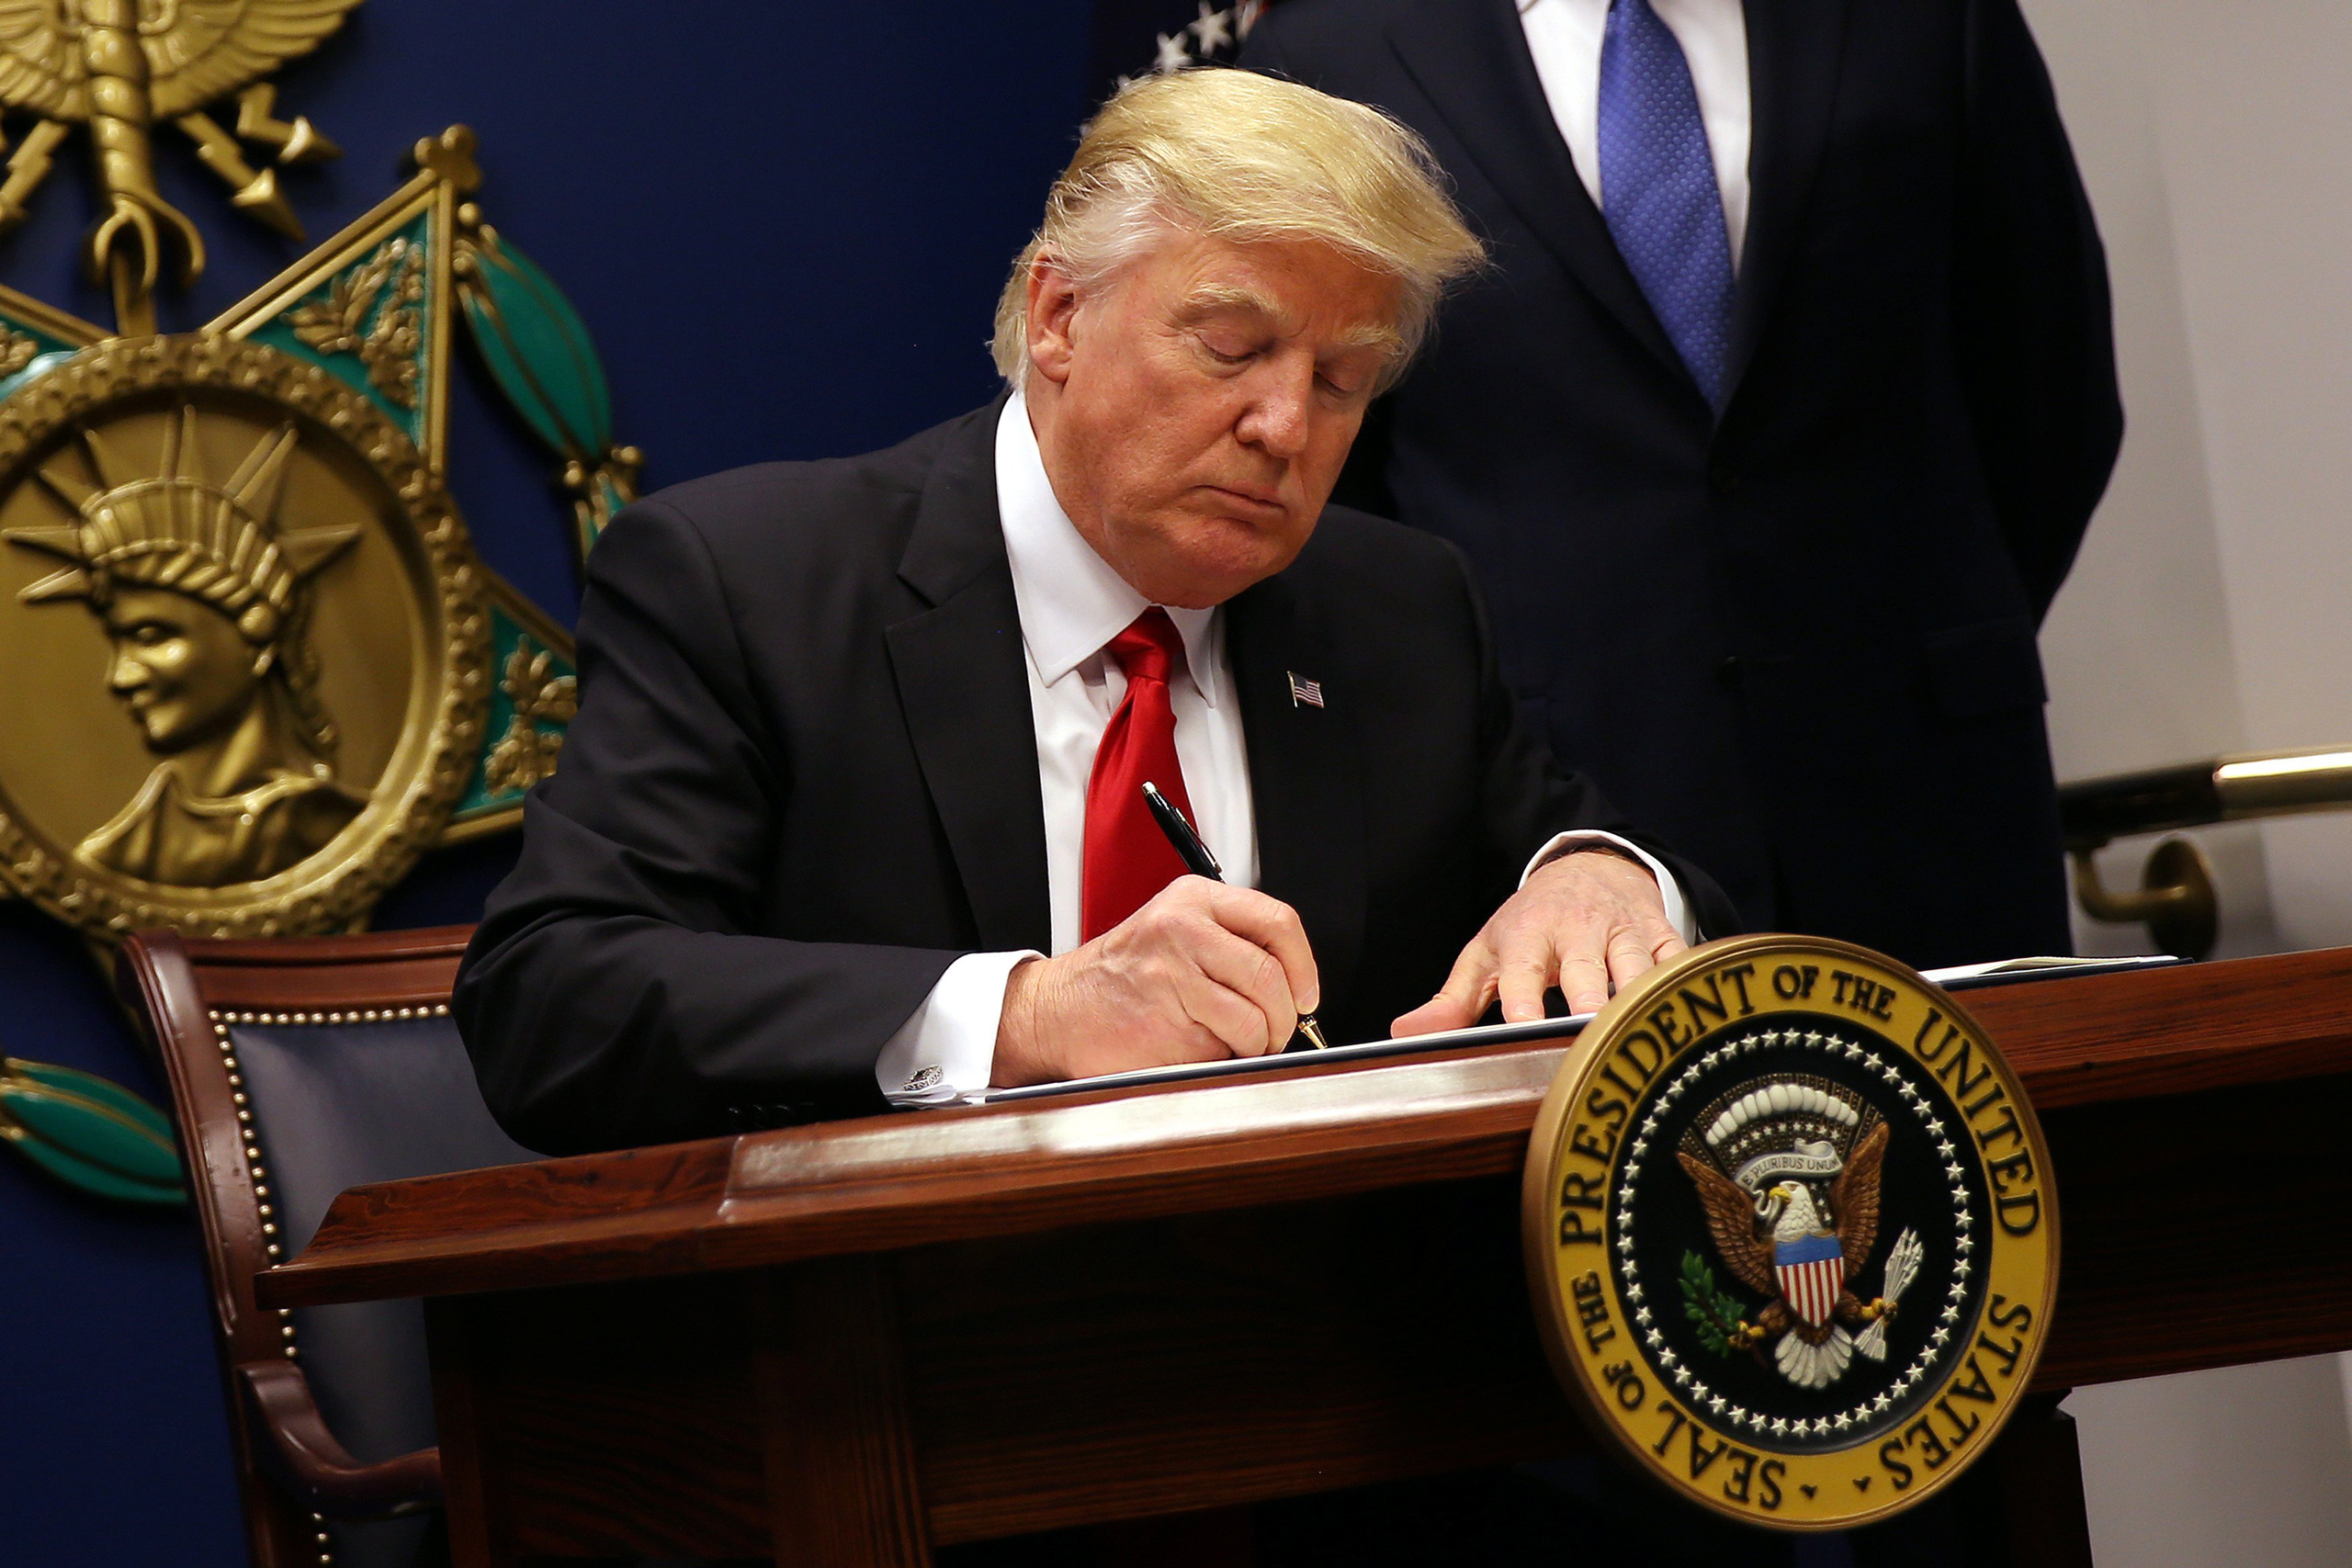 President Donald Trump signs an executive order imposing a four-month travel ban on refugees entering the United States and a 90-day hold on travelers from Syria, Iran and five other Muslim-majority countries at the Pentagon in Washington on Jan. 27, 2017. (Carlos Barria—Reuters)